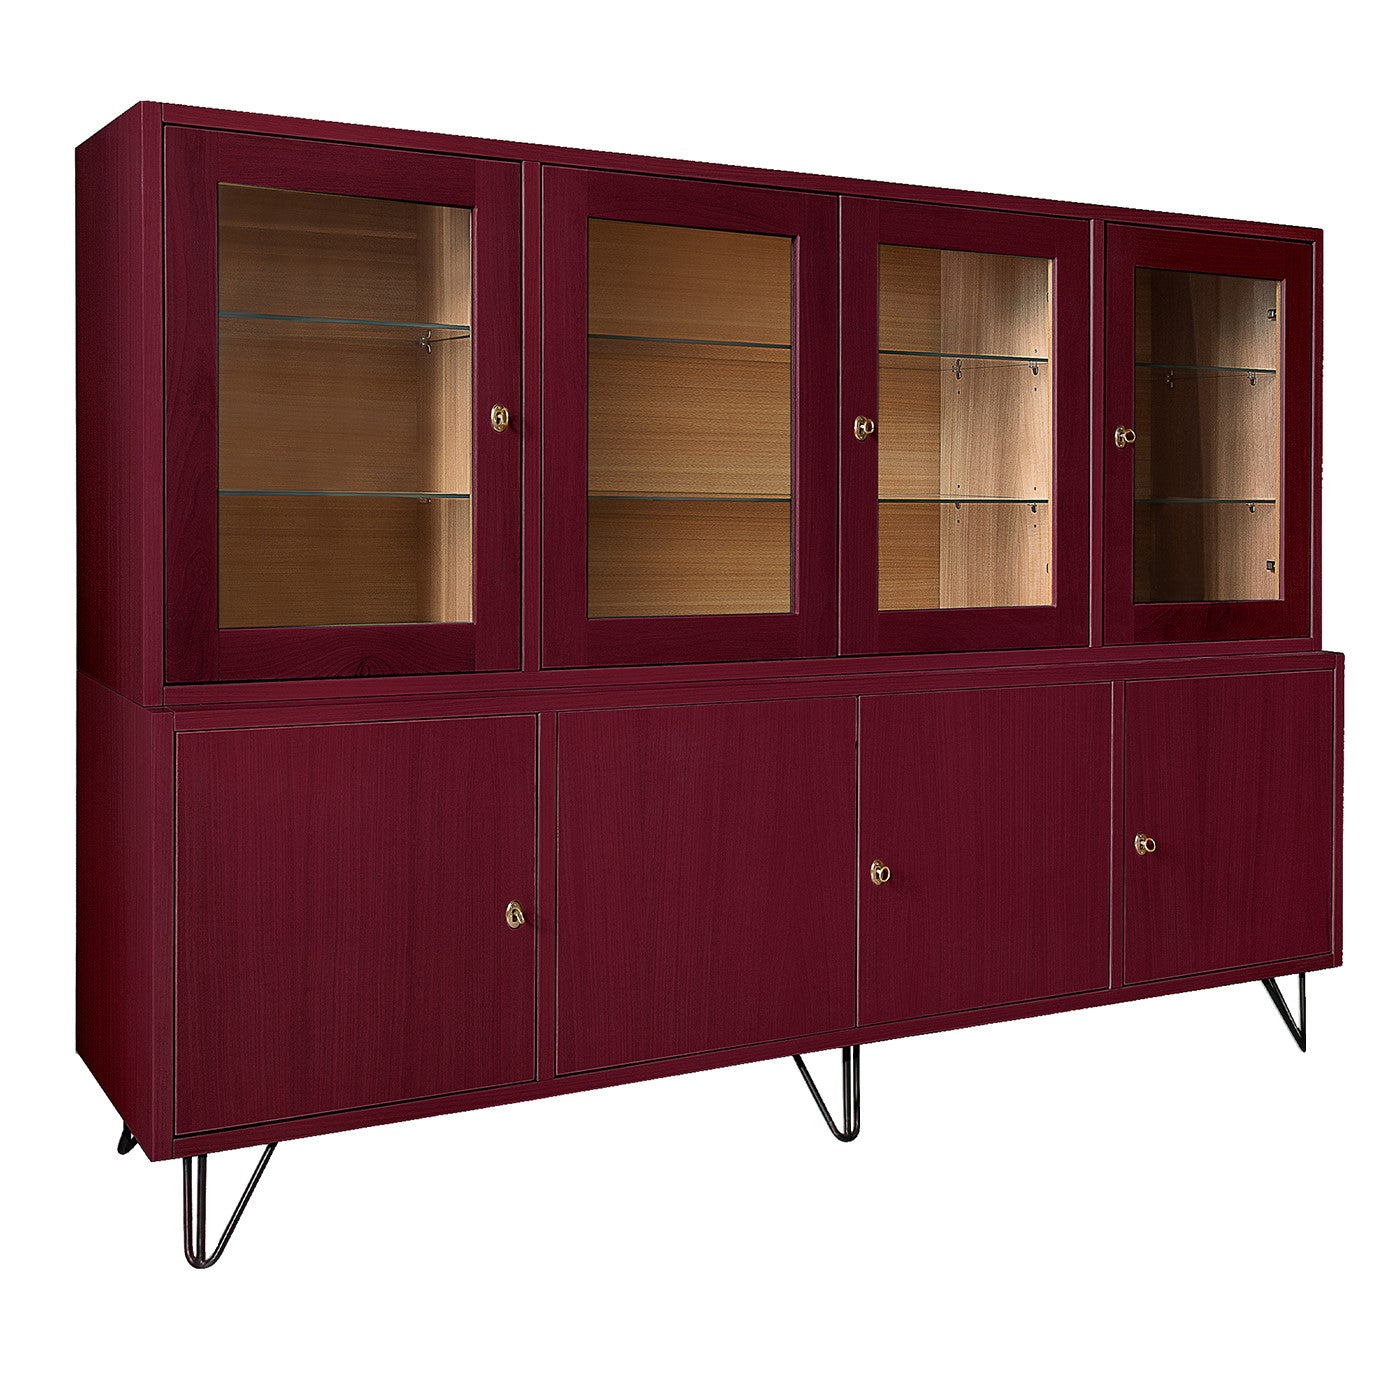 Eroica Burgundy Cabinet by Eugenio Gambella - Main view